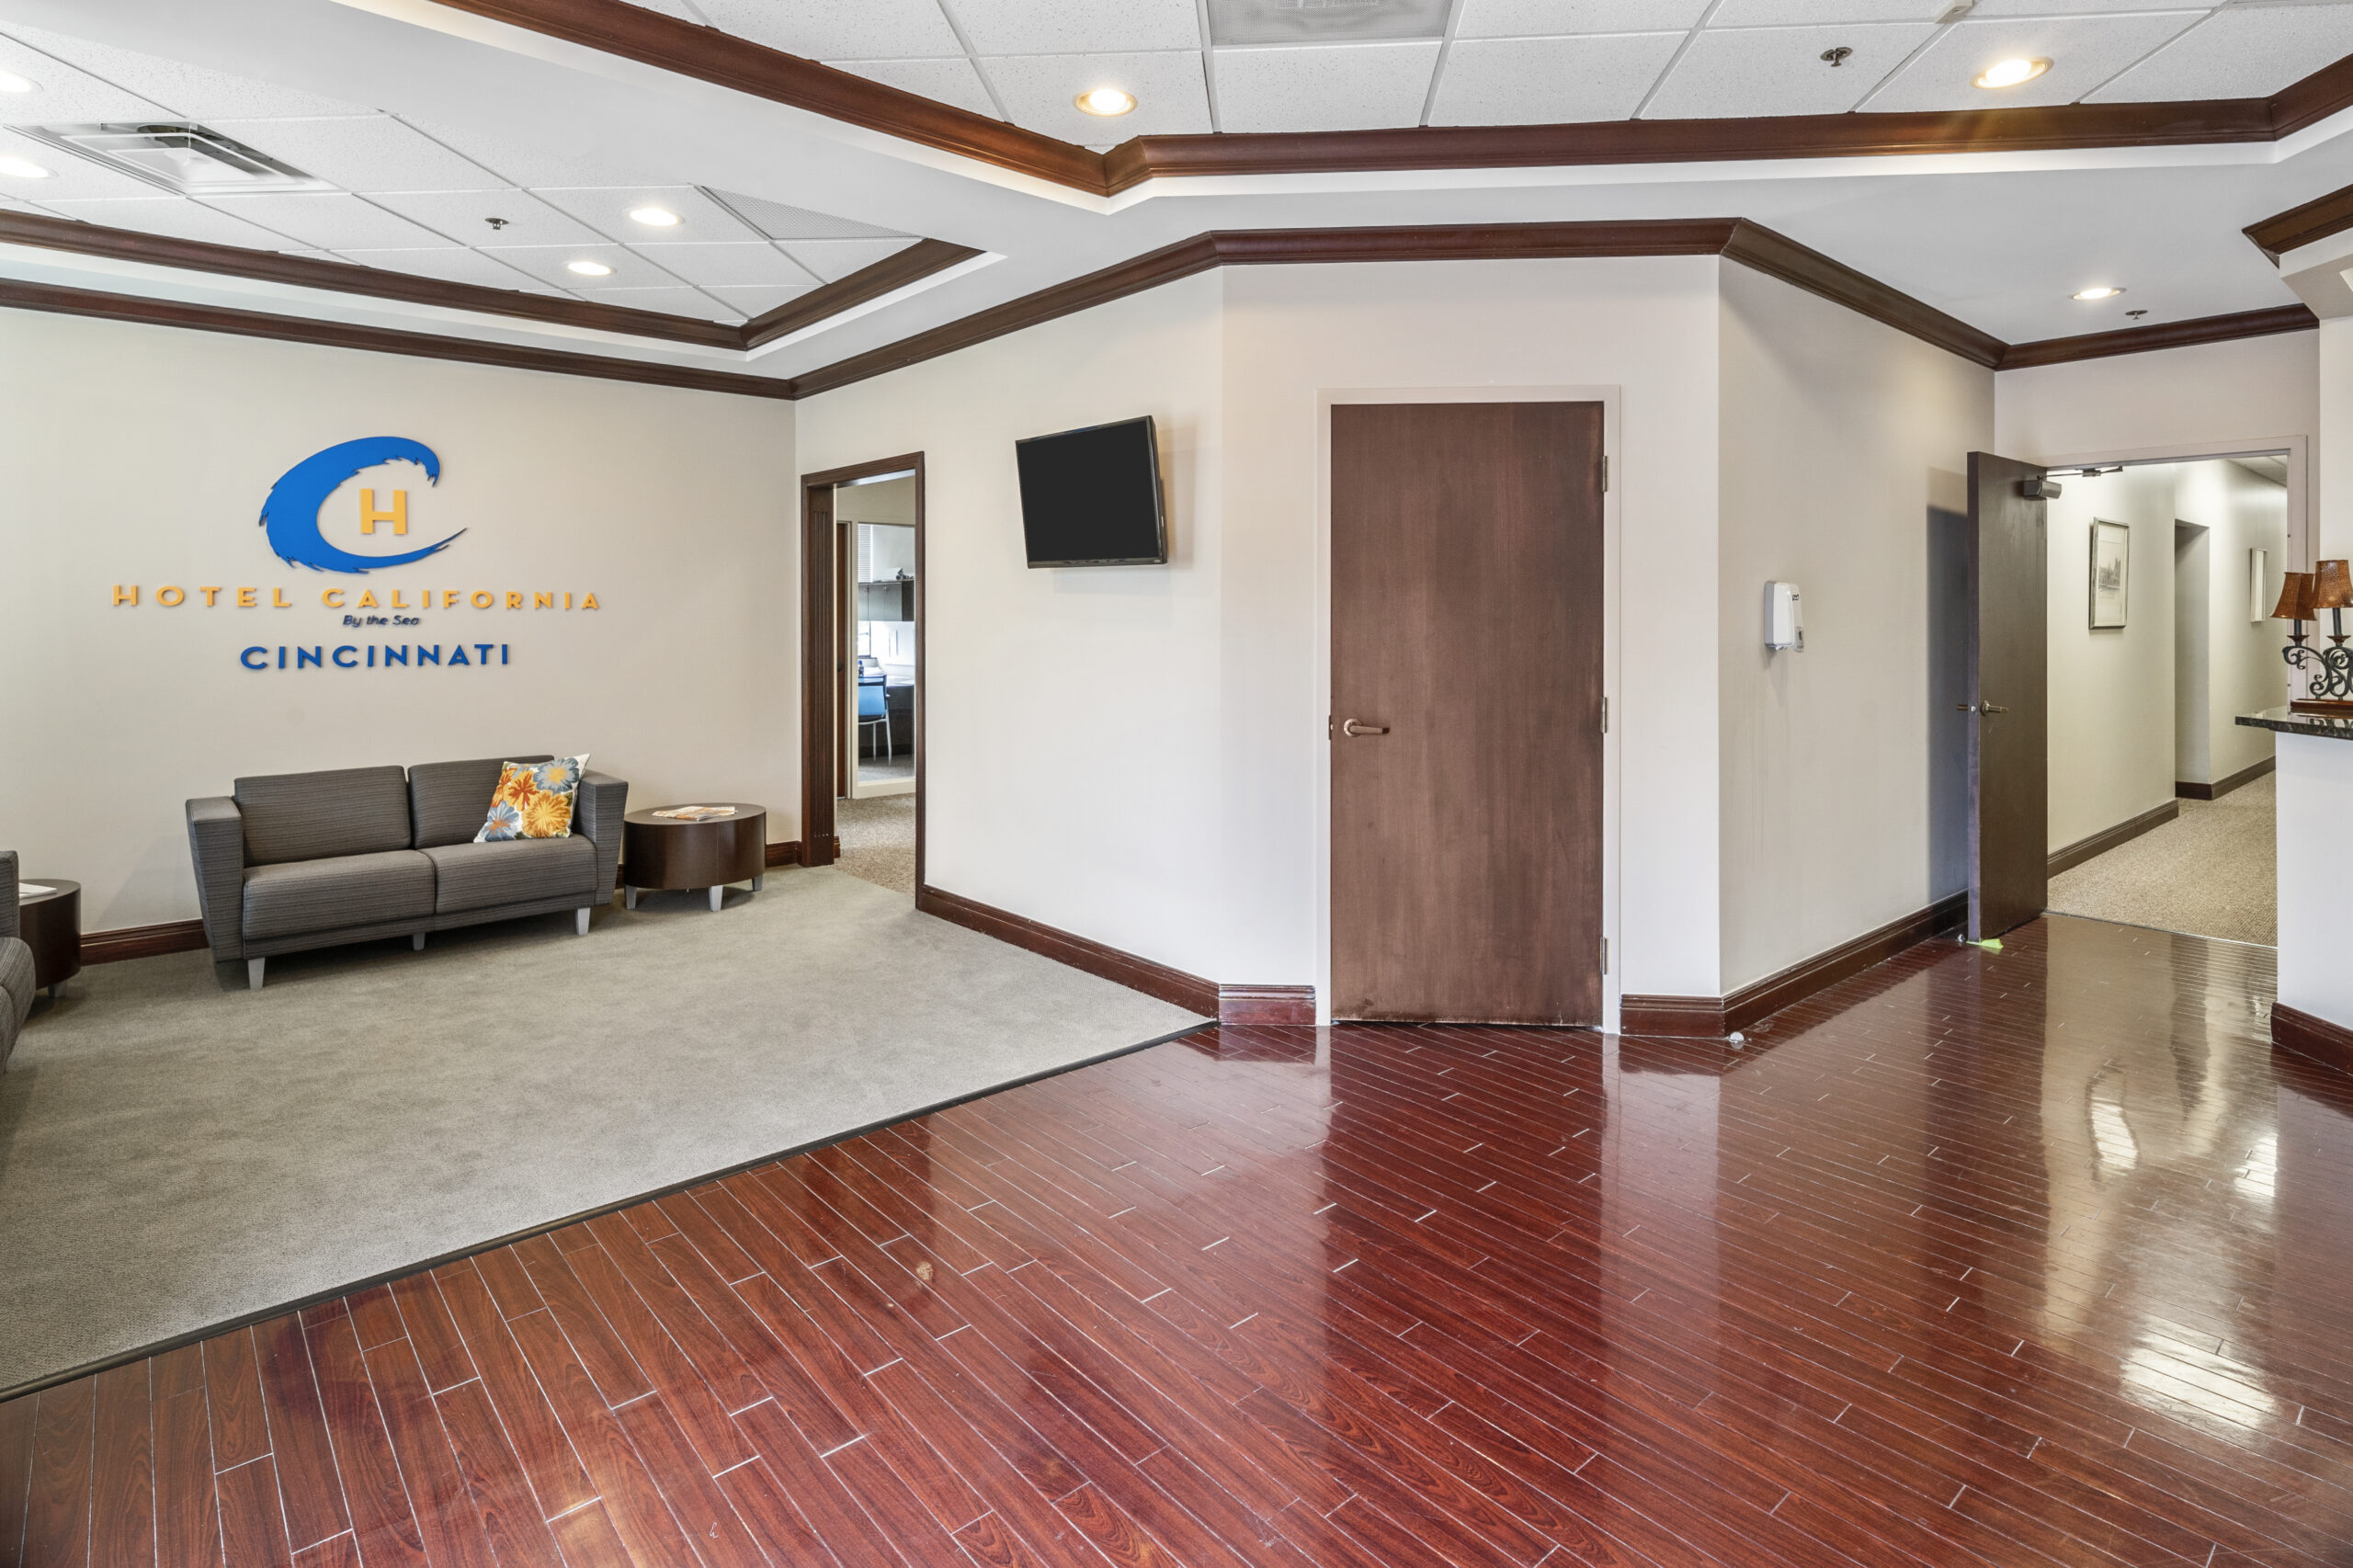 Lobby of Inpatient drug rehab ohio with red oak floors, brown door, and white rug